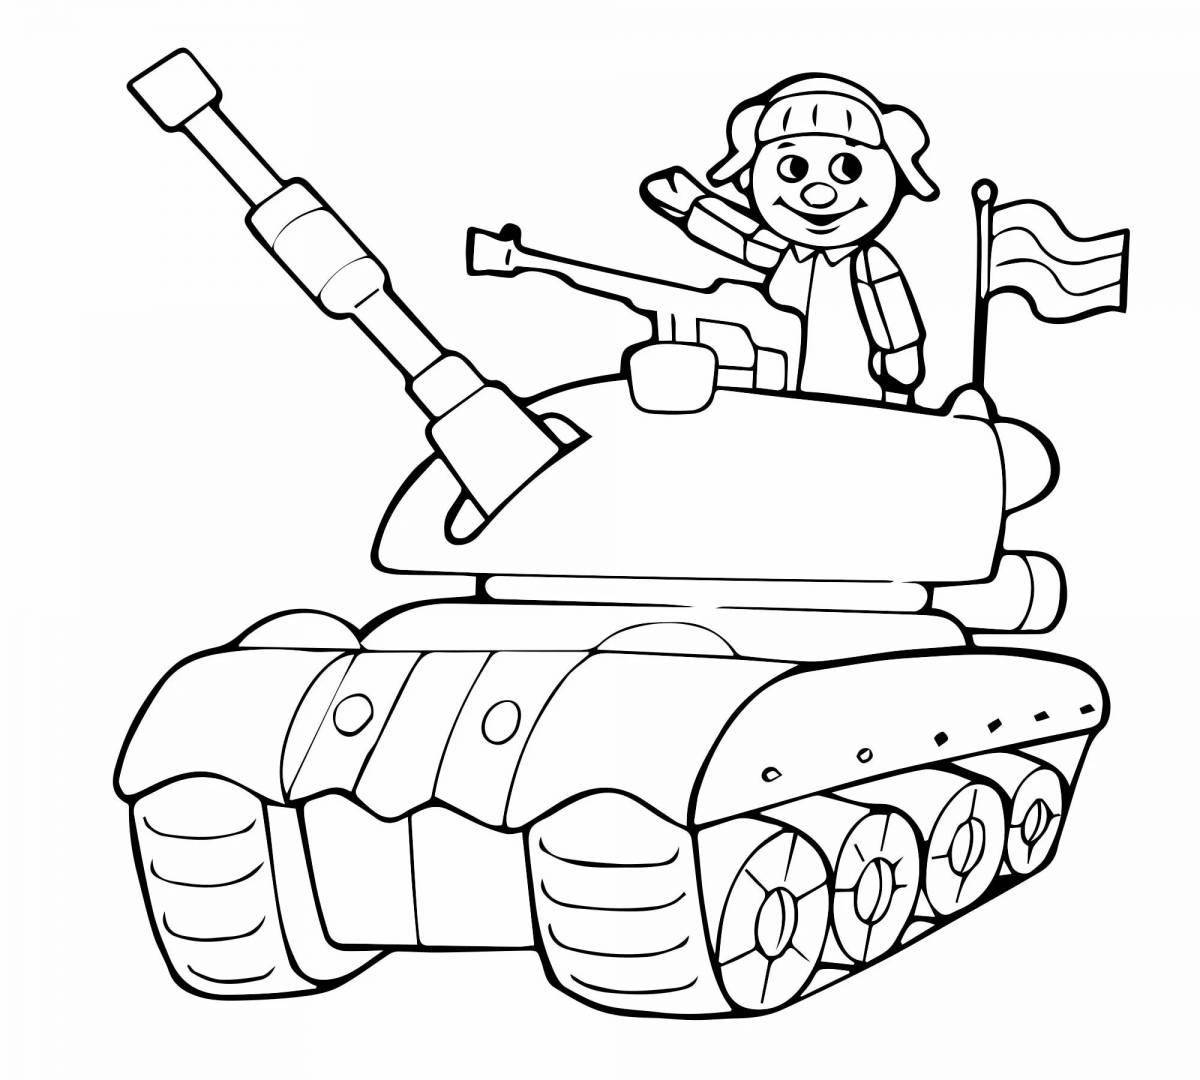 Festive military coloring book for 4-5 year olds